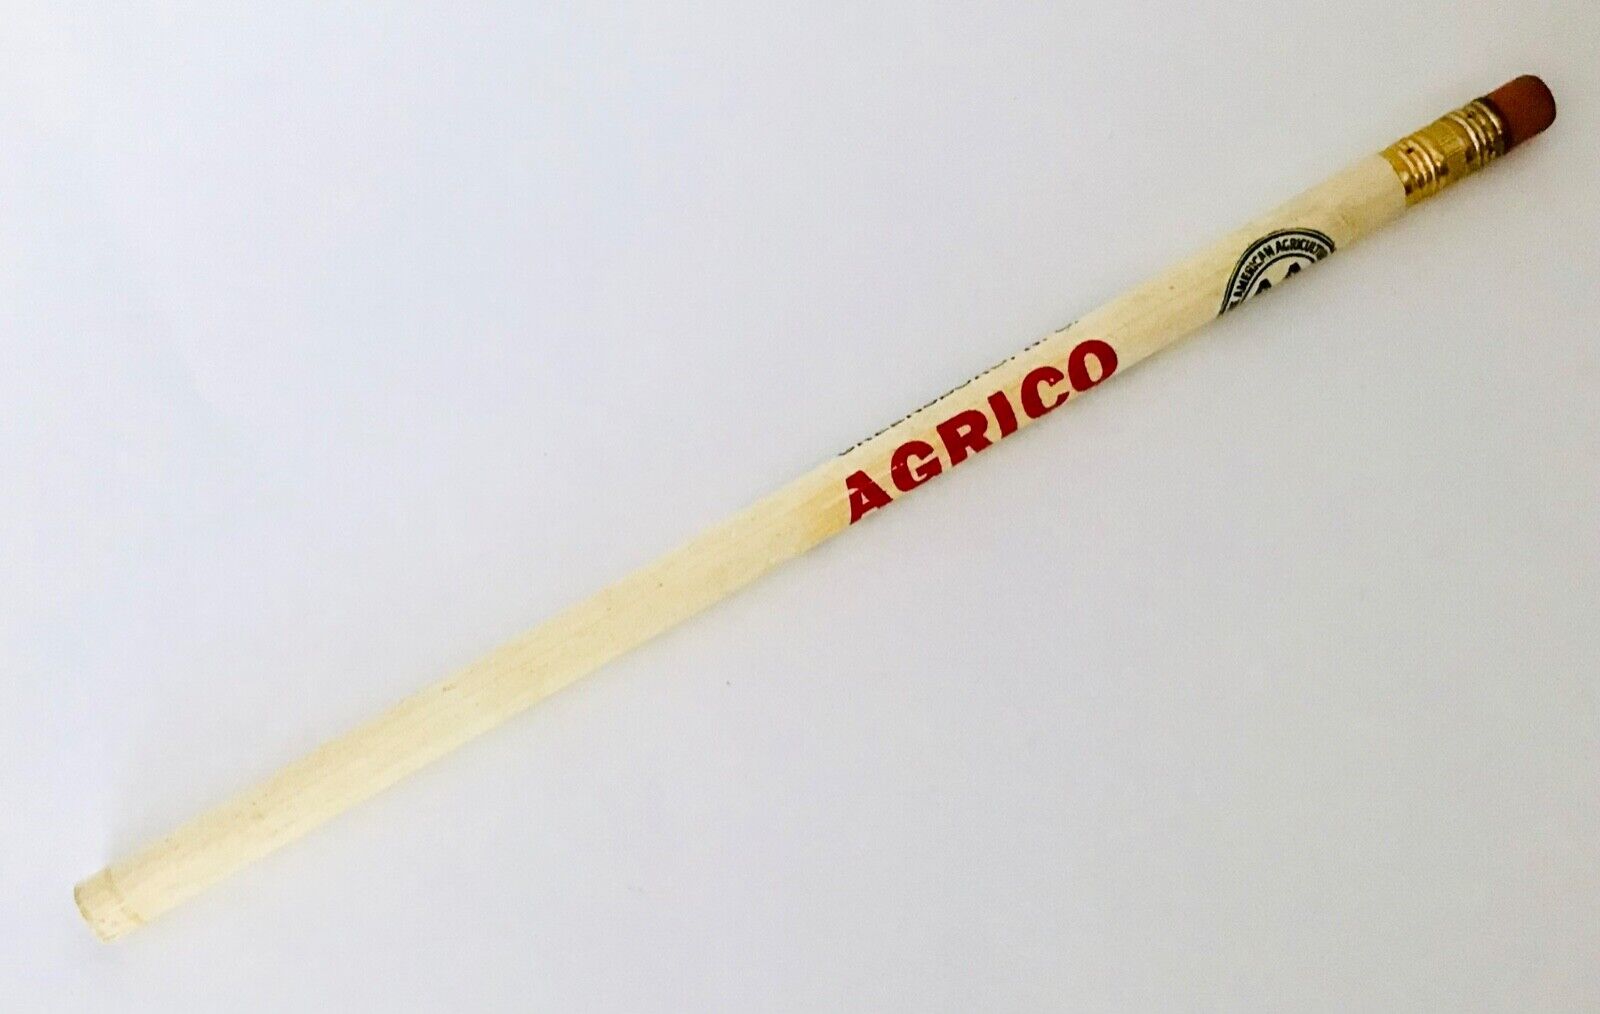 Vtg AGRICO Fertilizer Pencil American Agricultural Chemical Co. Greensboro NC